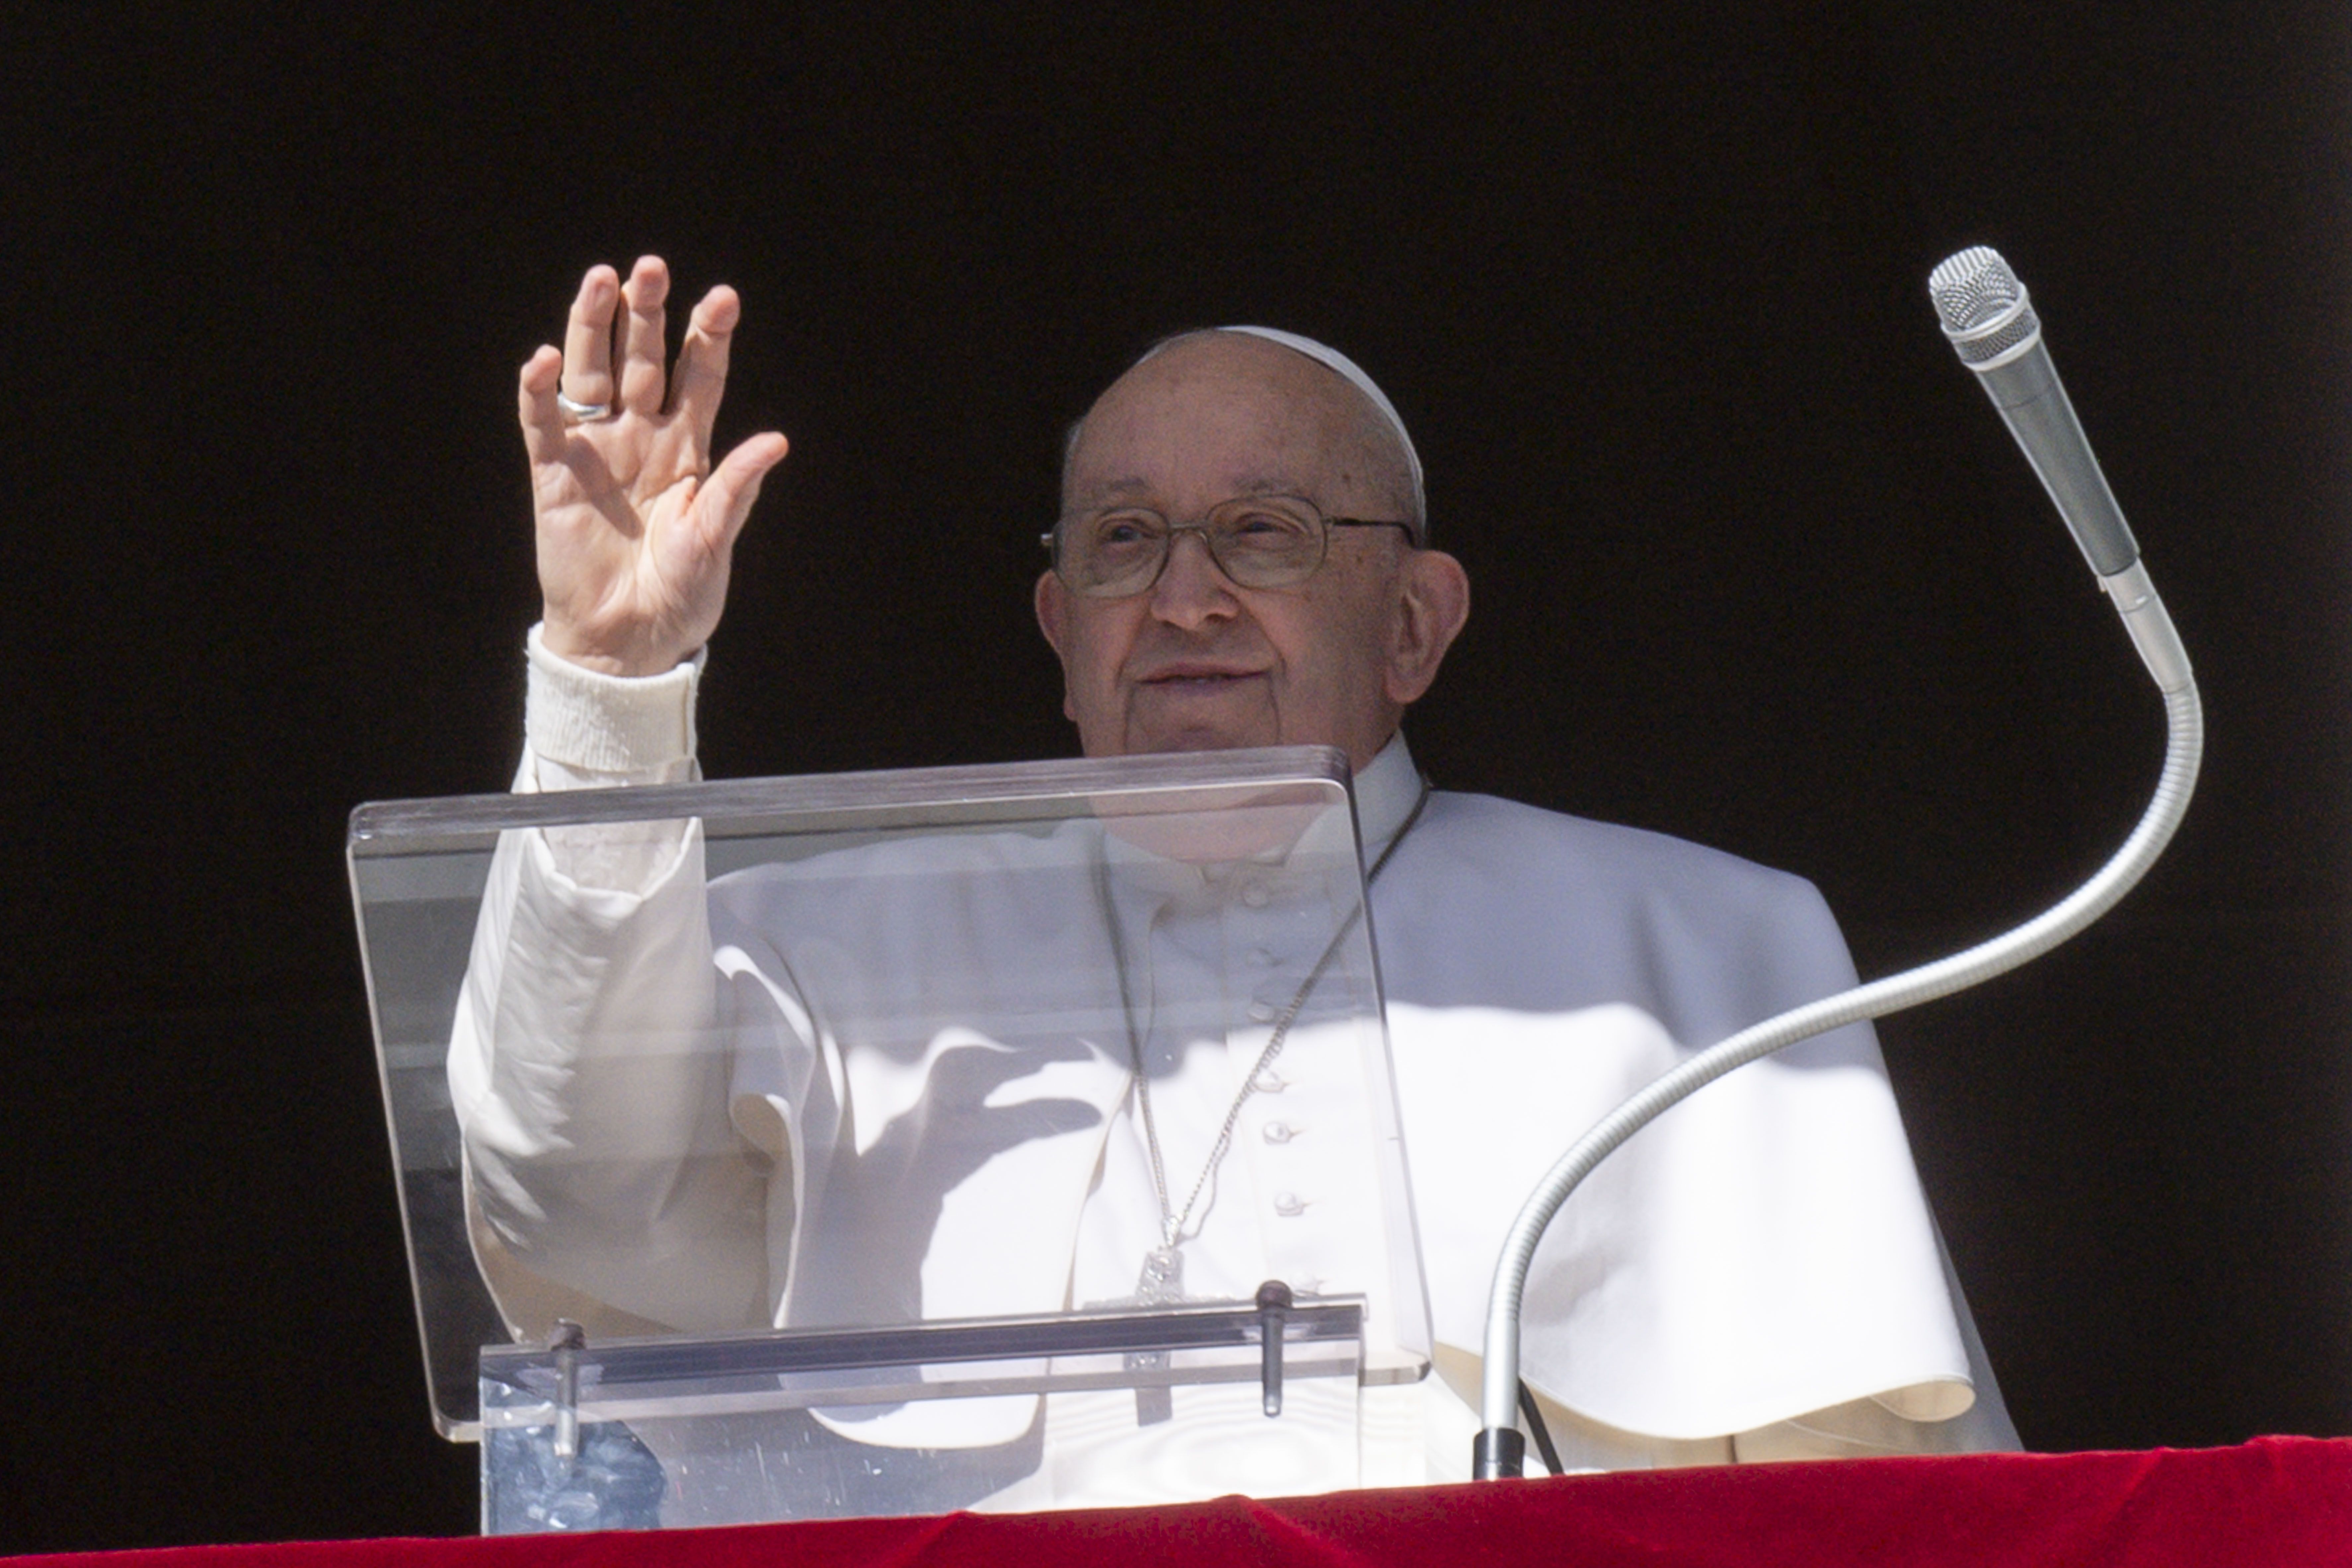 Pope Francis announces Year of Prayer to prepare for 2025 Jubilee